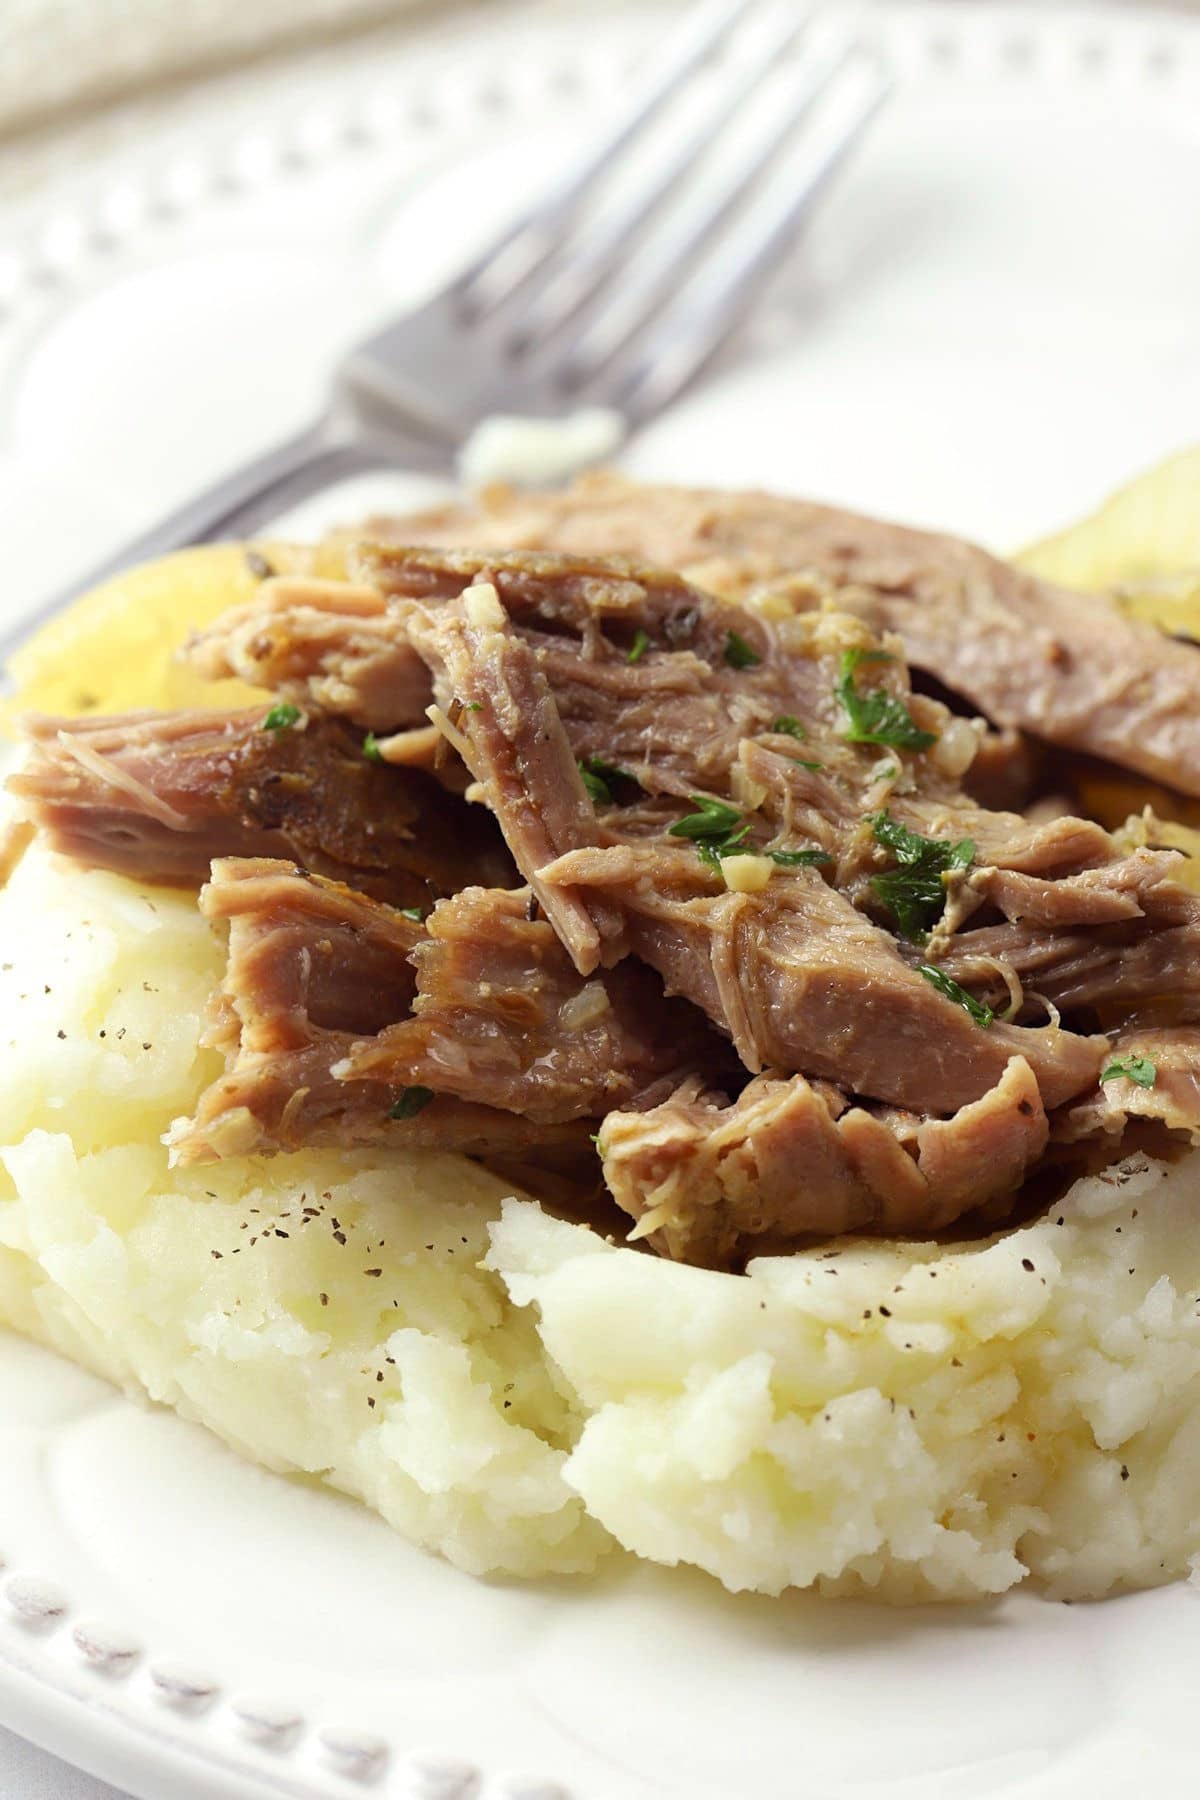 Garlic & herb slow cooker pork roast on a bed of mashed potatoes on a plate.